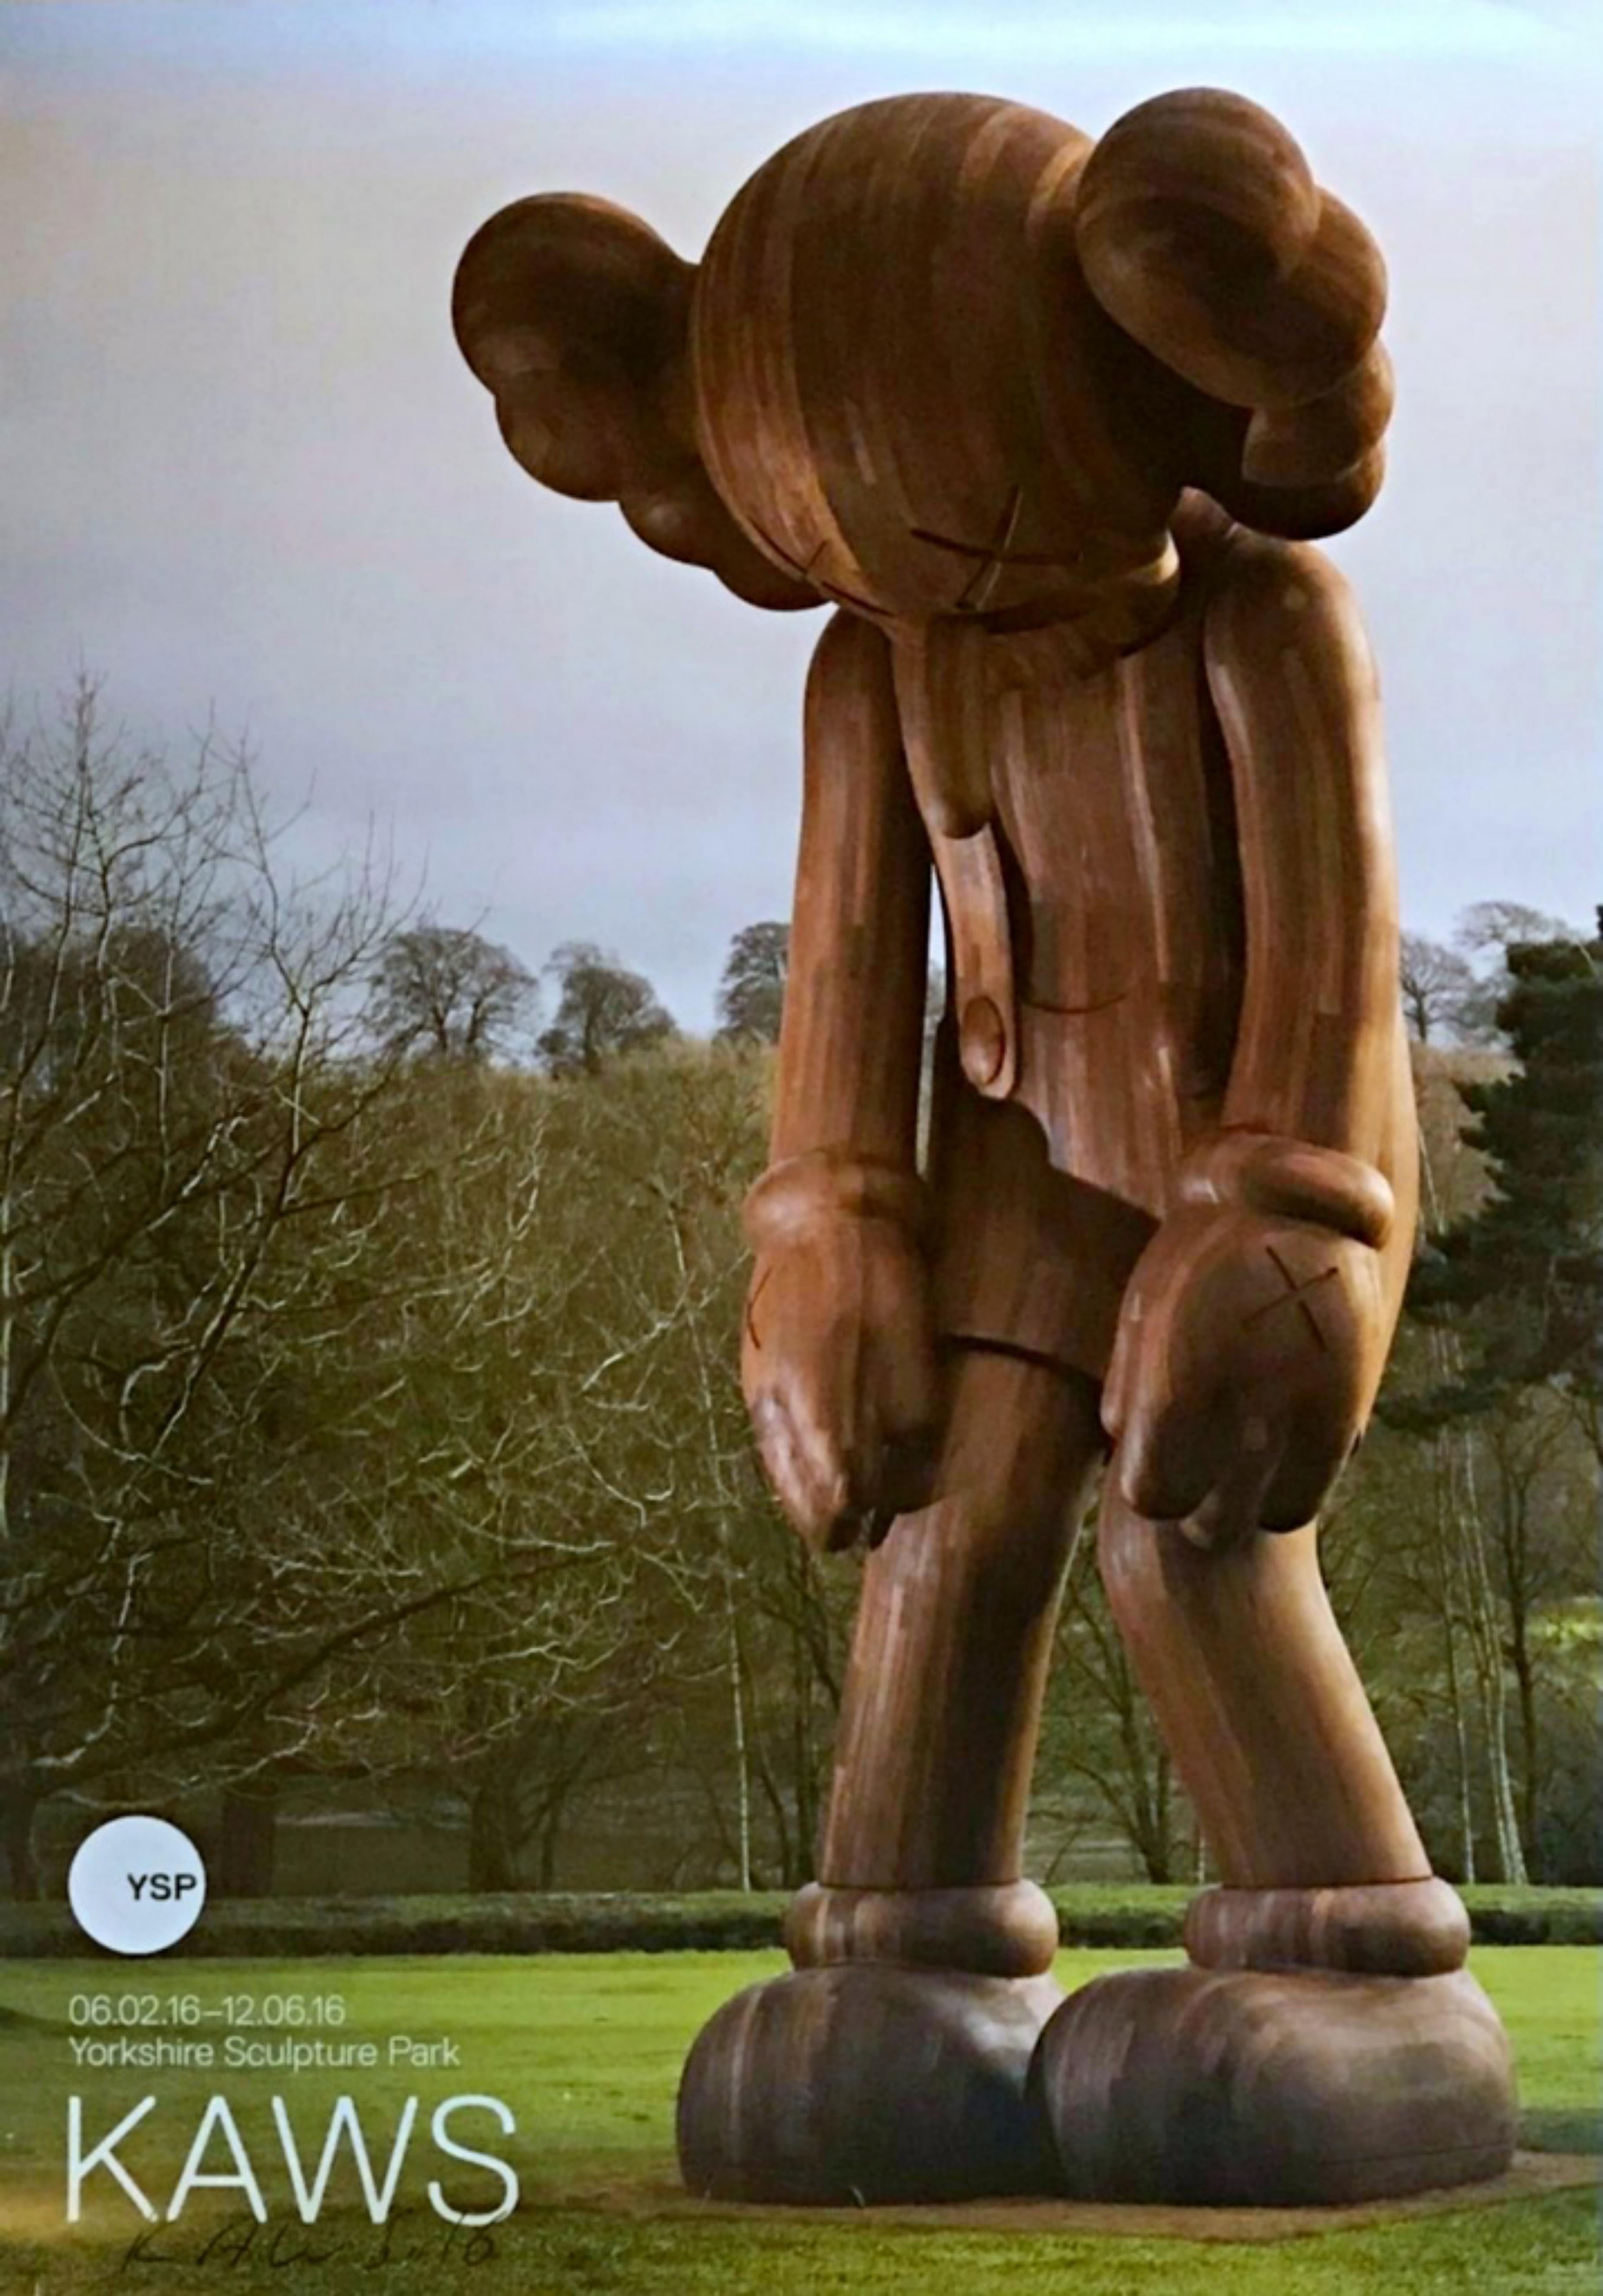 KAWS
KAWS at Yorkshire Sculpture Park (Hand Signed), 2016
Offset lithograph poster, uniquely signed and dated by KAWS
33 × 24 inches
Signed and dated on the lower front
Unframed
Hand signed by KAWS at the Yorkshire Sculpture Park in the UK